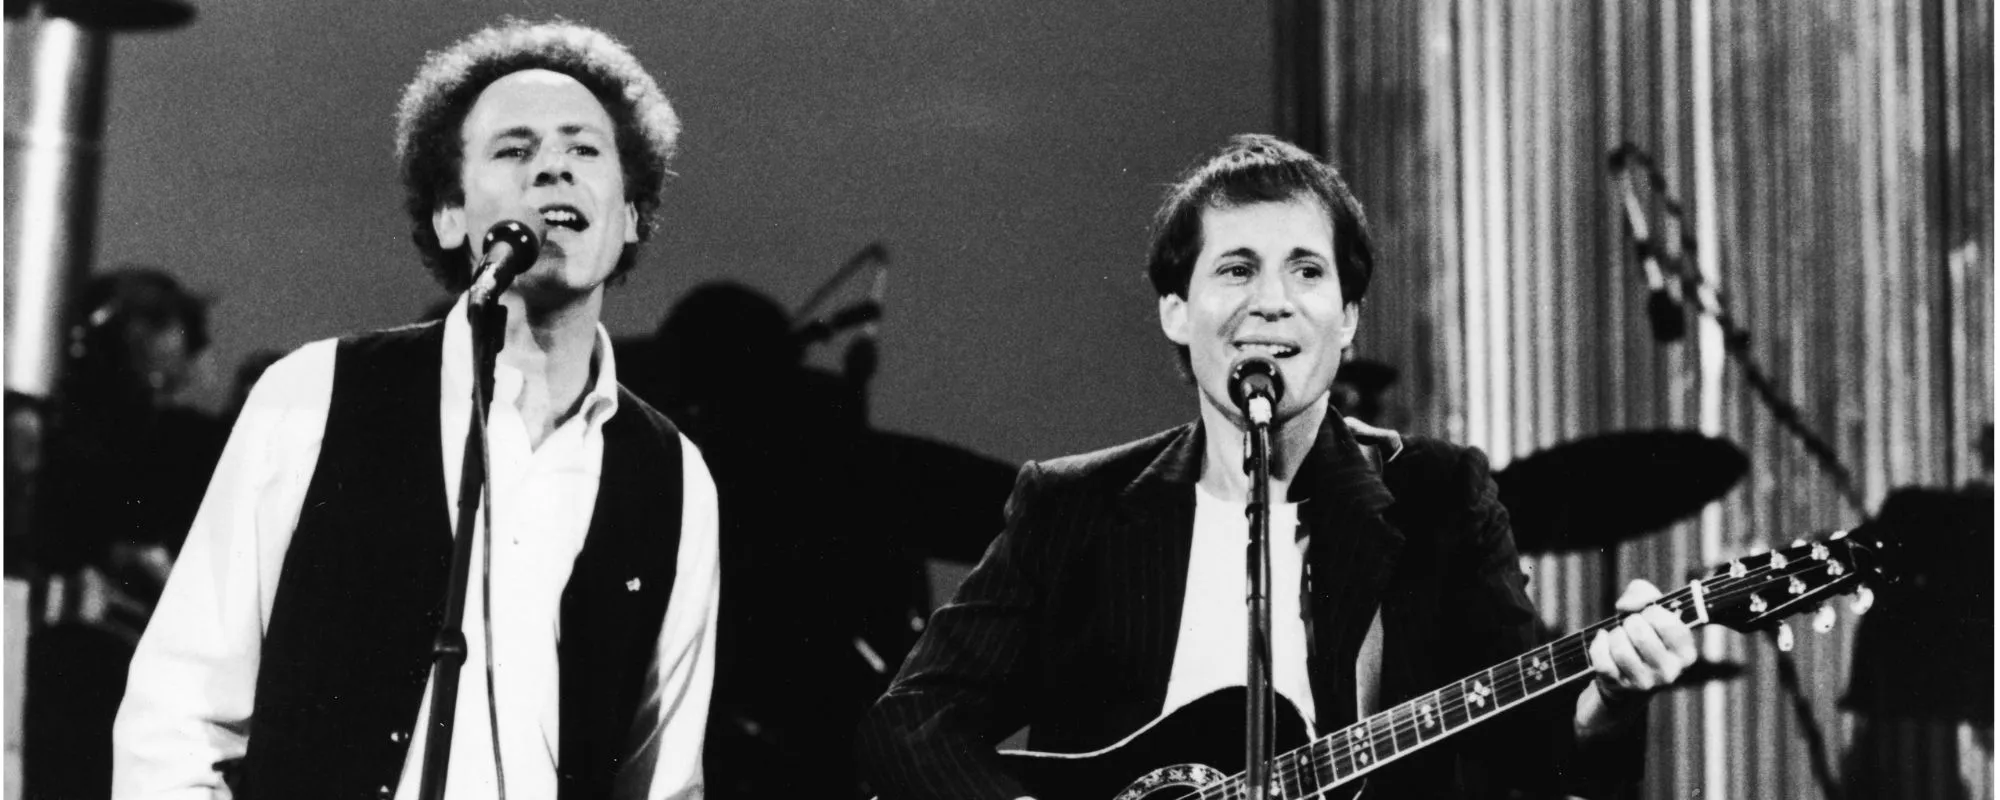 The Meaning Behind Simon & Garfunkel’s Poignant Masterpiece “The Boxer”